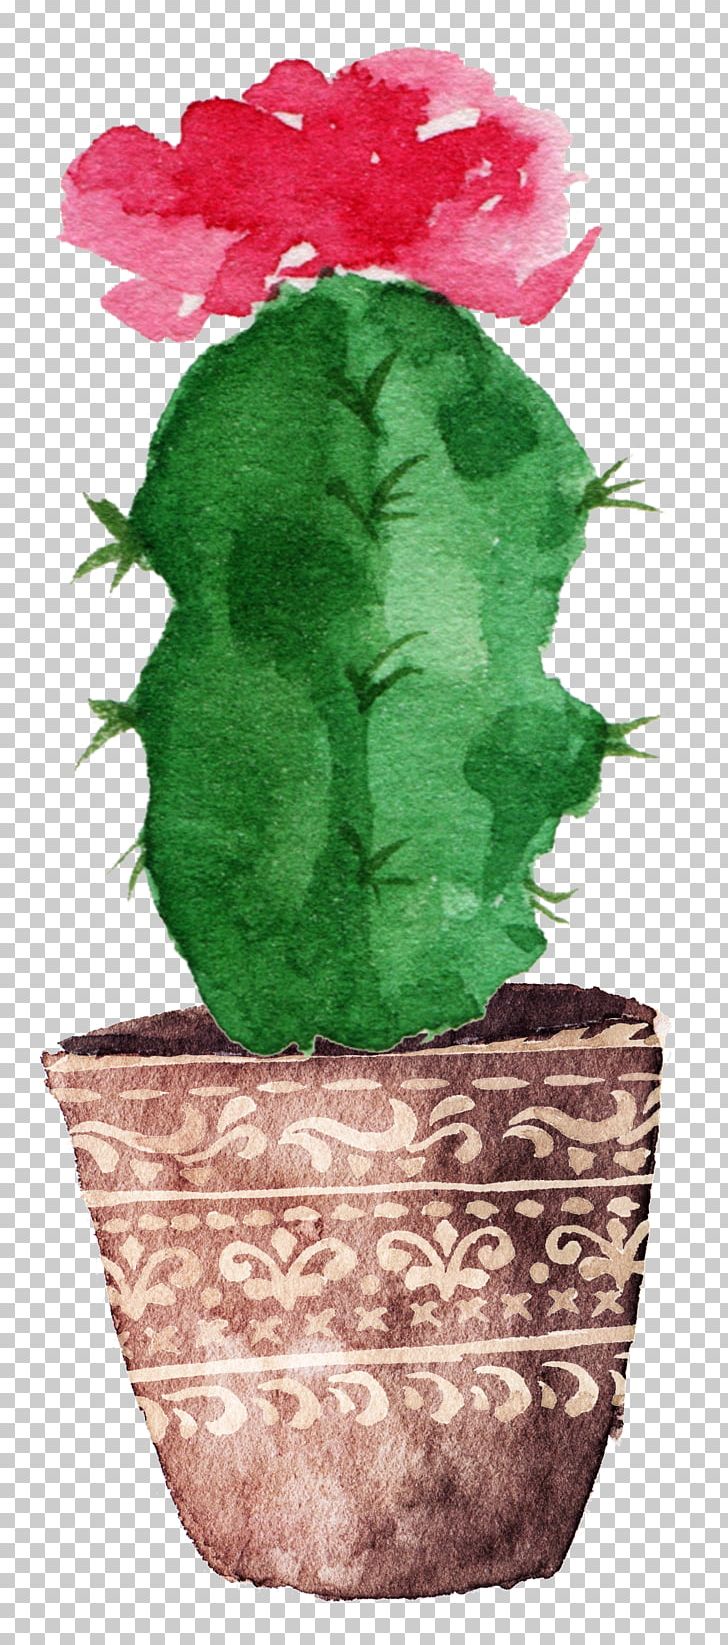 Cactaceae Watercolor Painting Drawing Canvas PNG, Clipart, Bloom, Blooming, Cactus, Cactus Cartoon, Cactus Flowers Free PNG Download